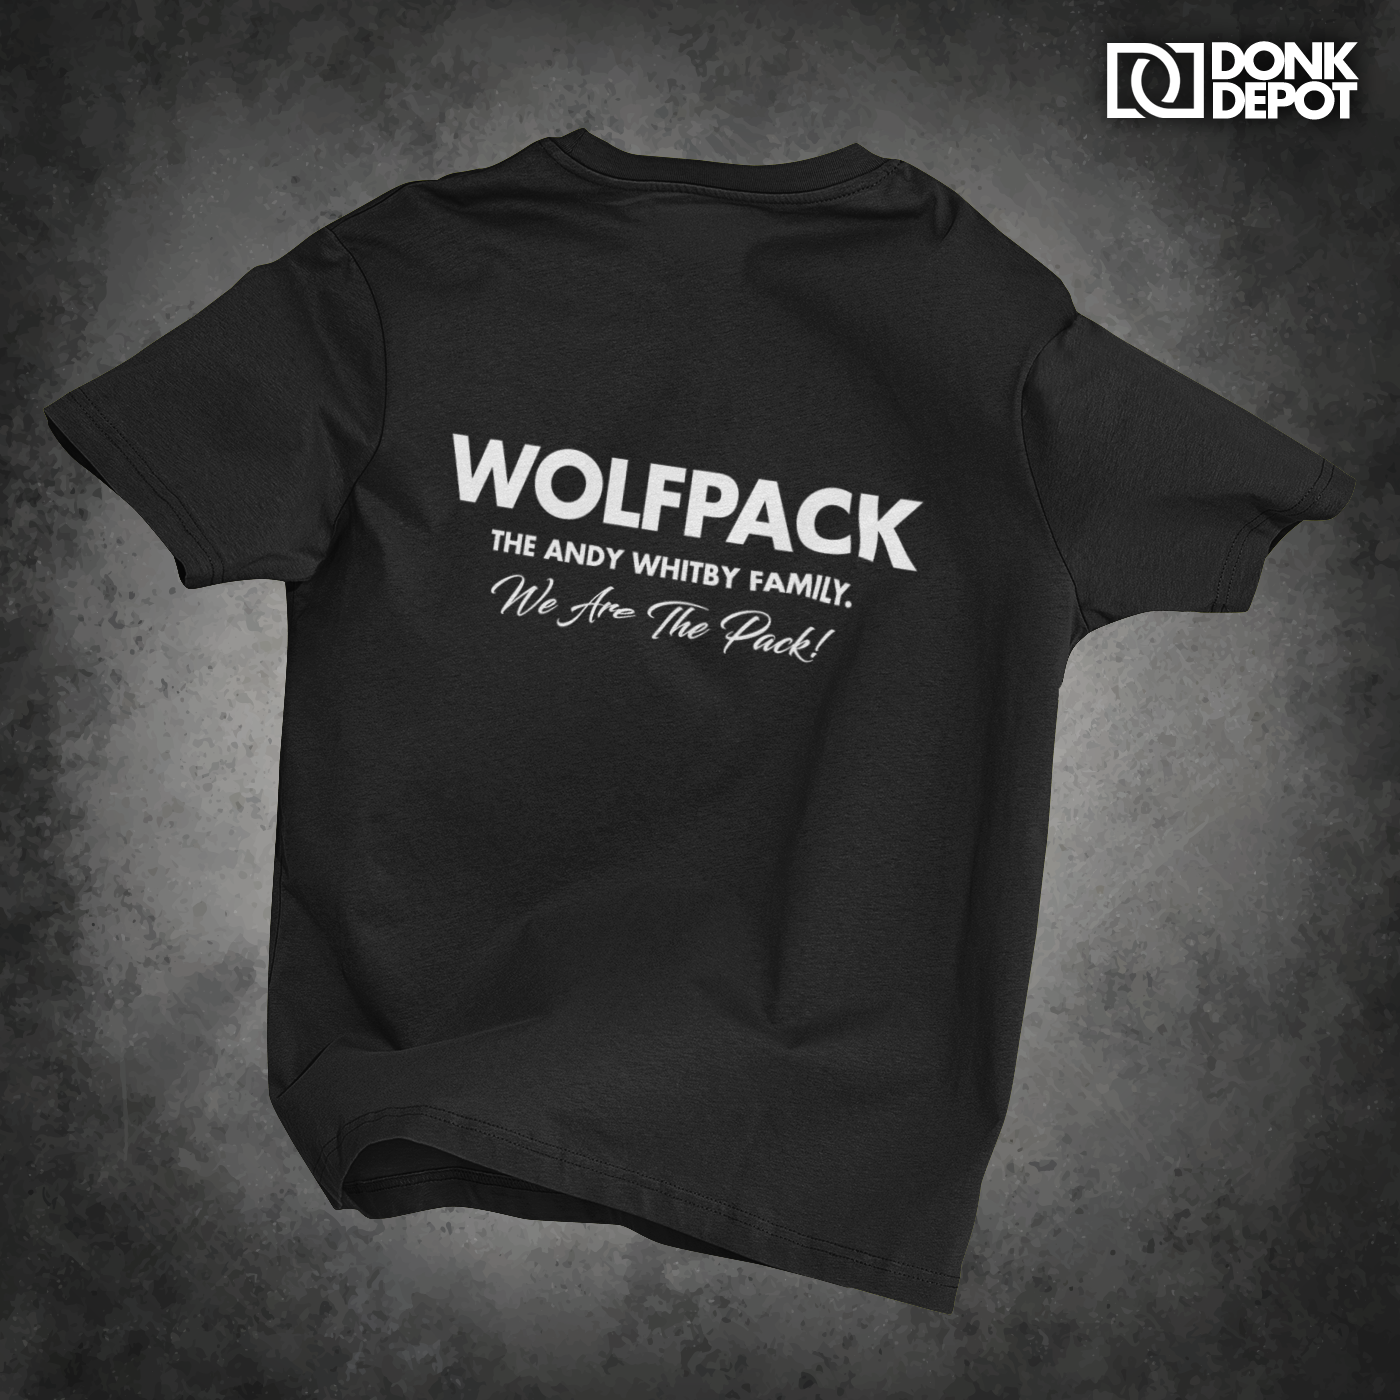 Whitby Wolfpack Oversized back text t-shirt